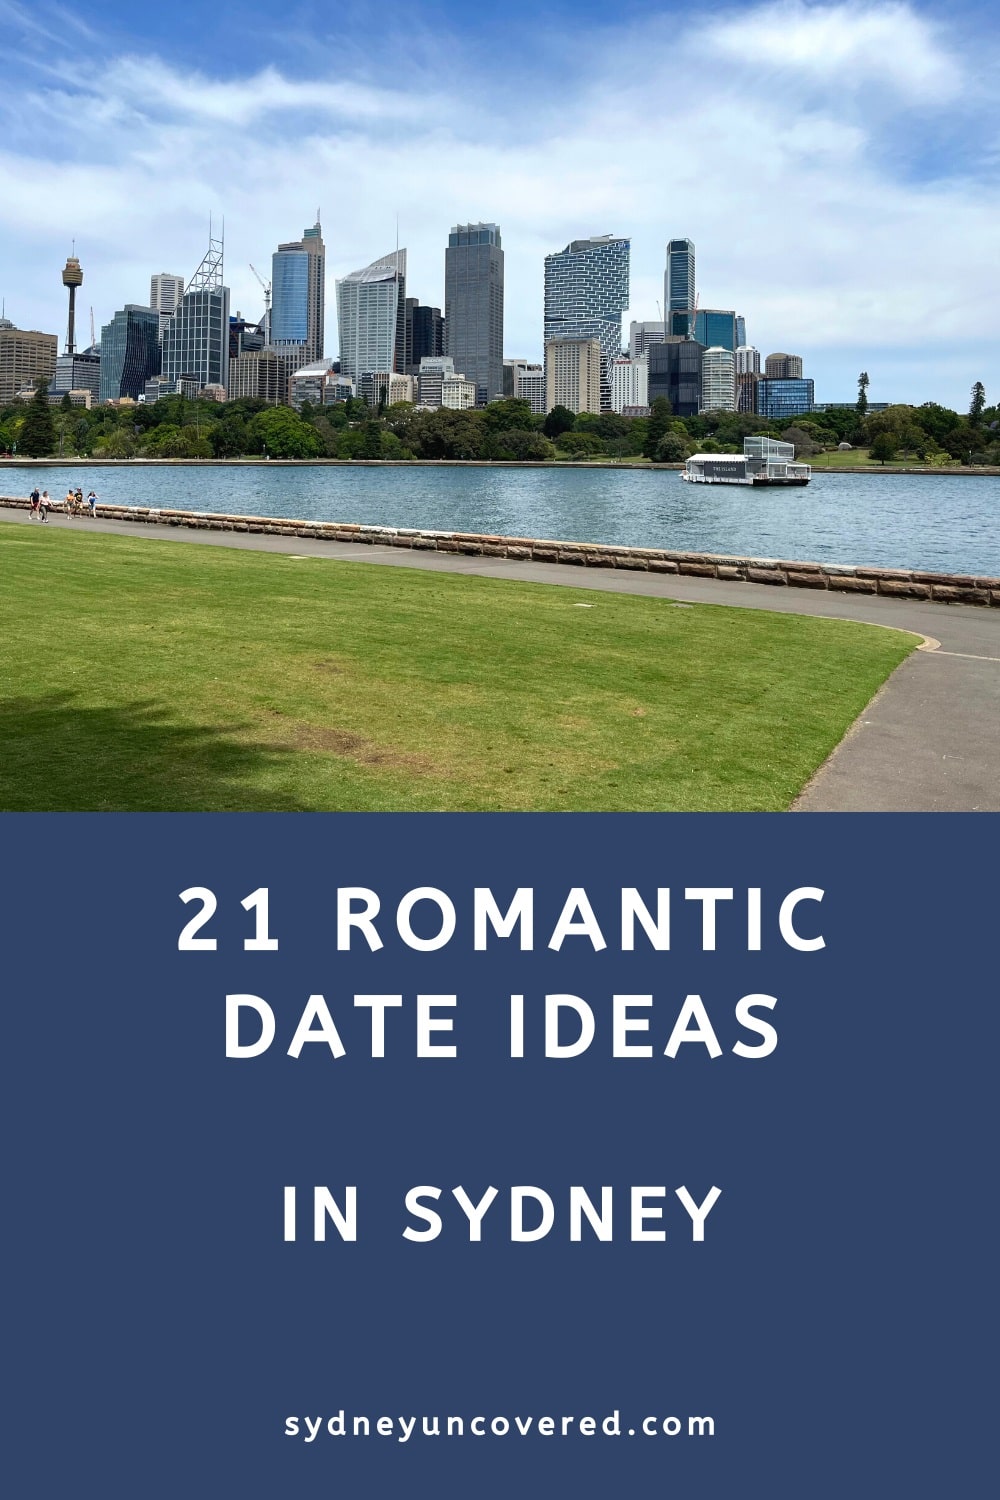 Romantic things to do in Sydney (21 date ideas)